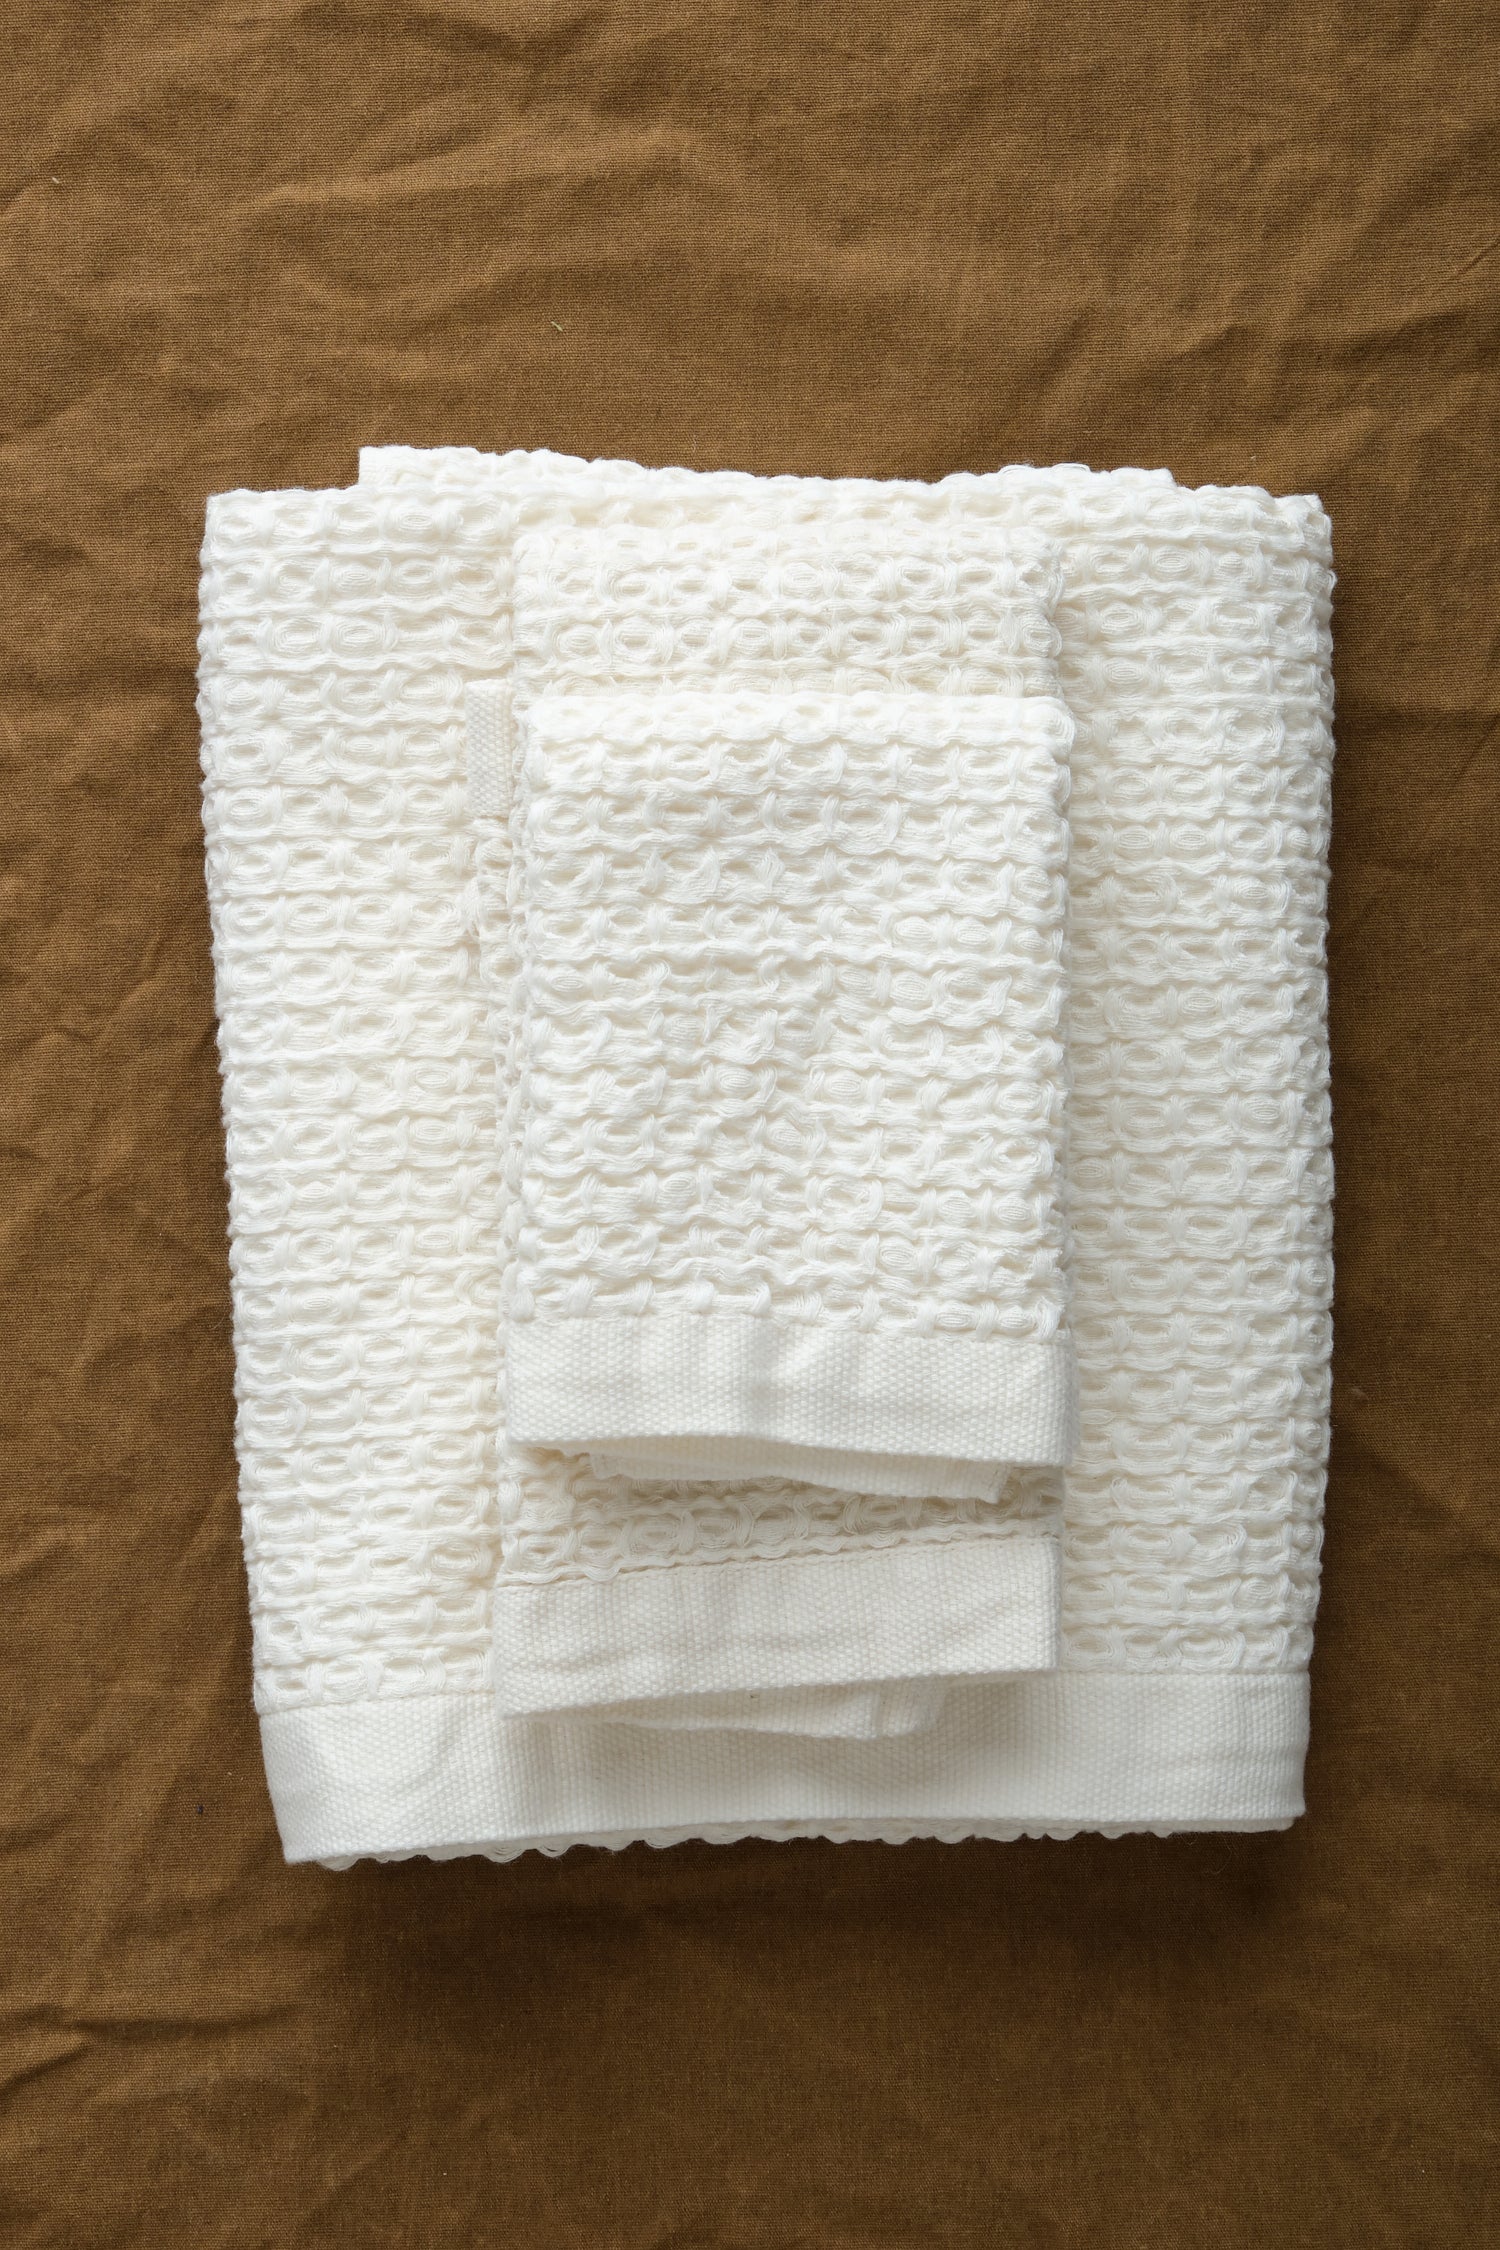 Stacked Cotton/Linen towels